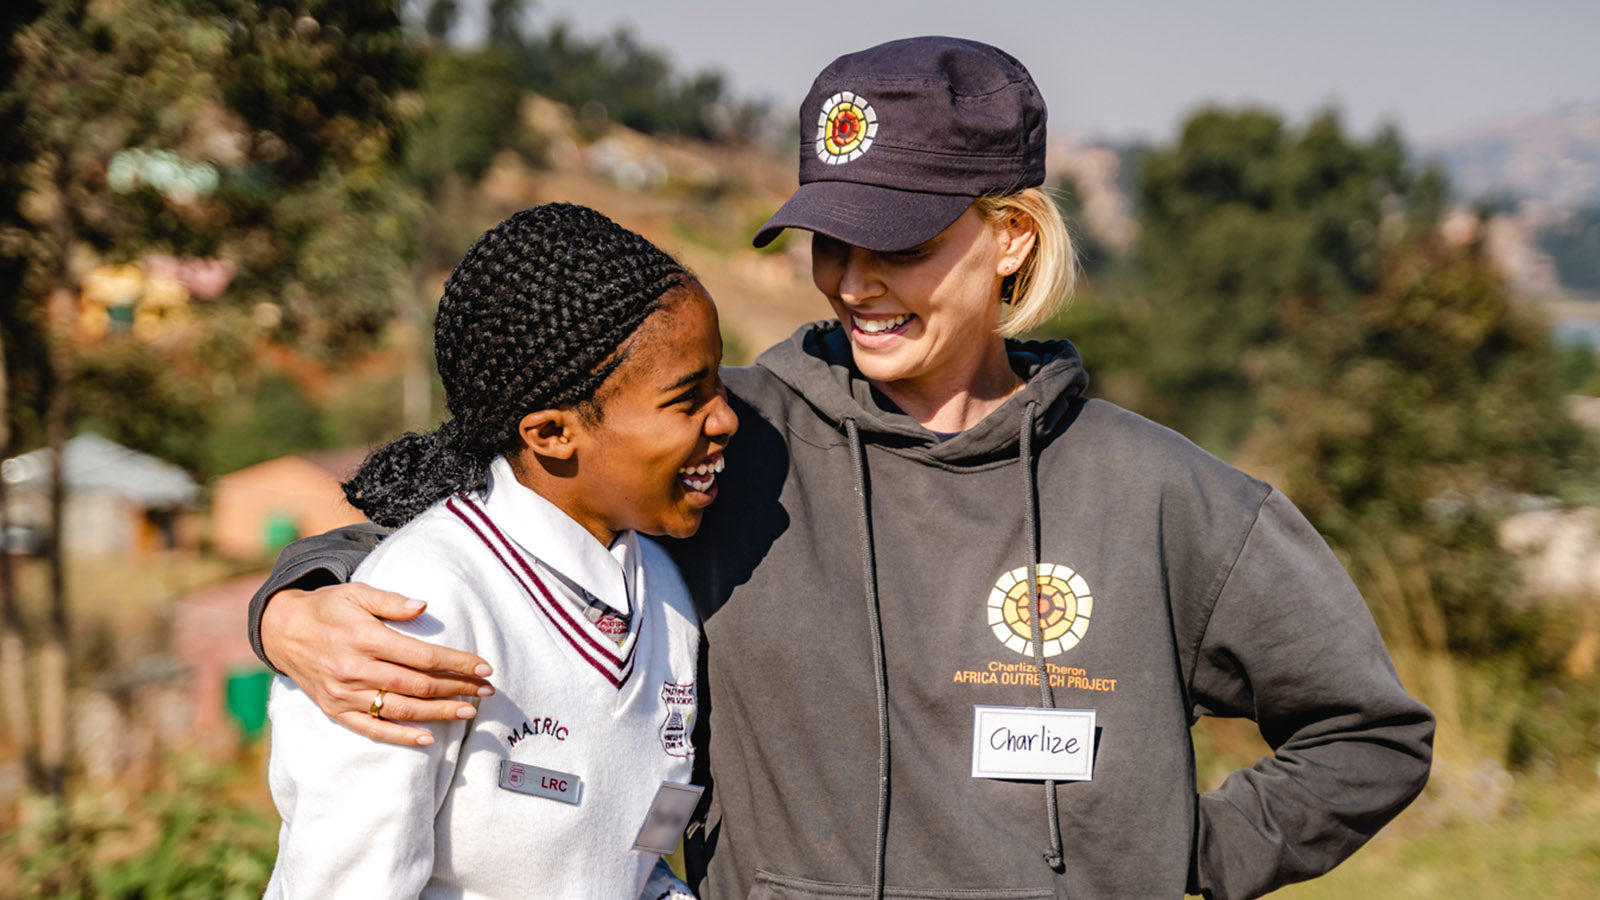 Charlize Theron posing with a schoolgirl in Africa